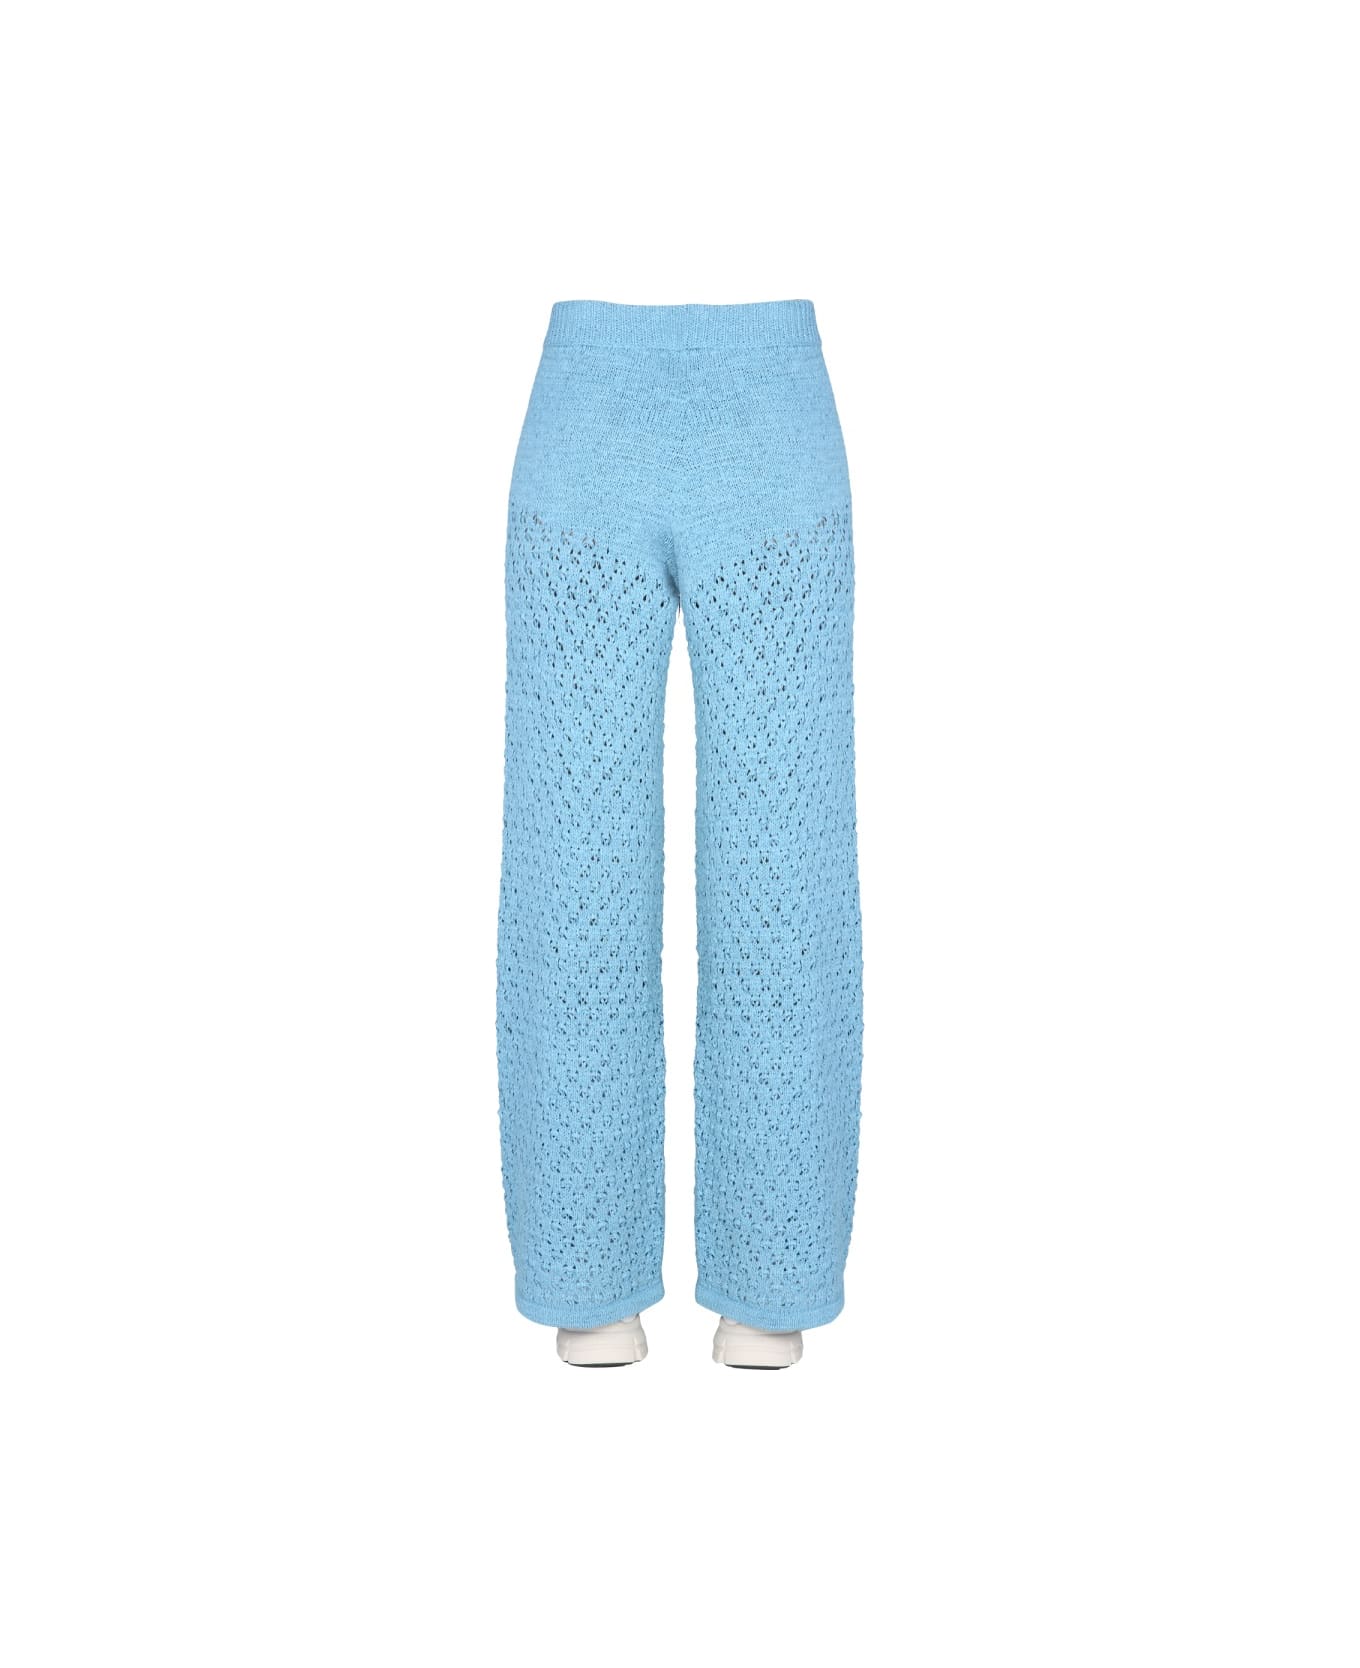 Rotate by Birger Christensen "calla" Trousers - BABY BLUE